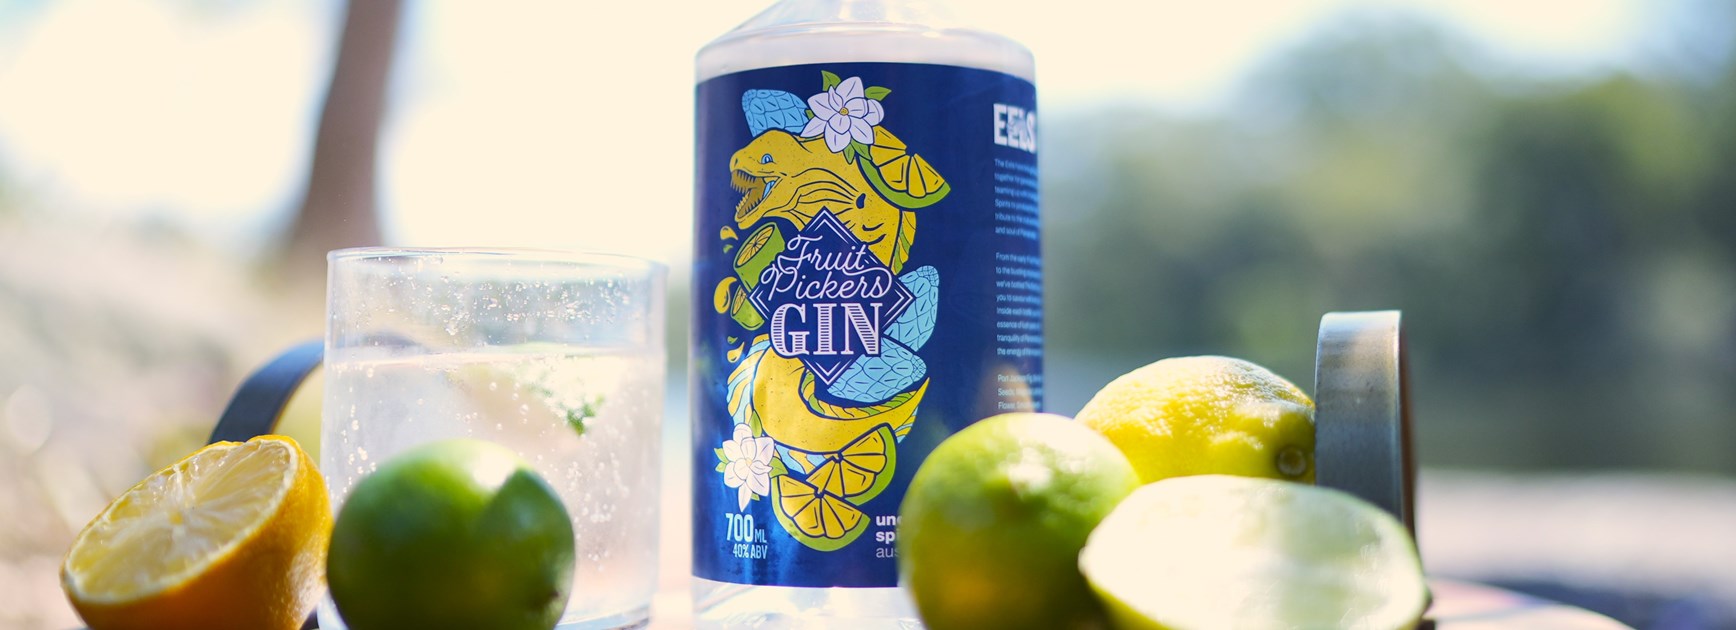 Fruit Pickers Gin launched with Underground Spirits